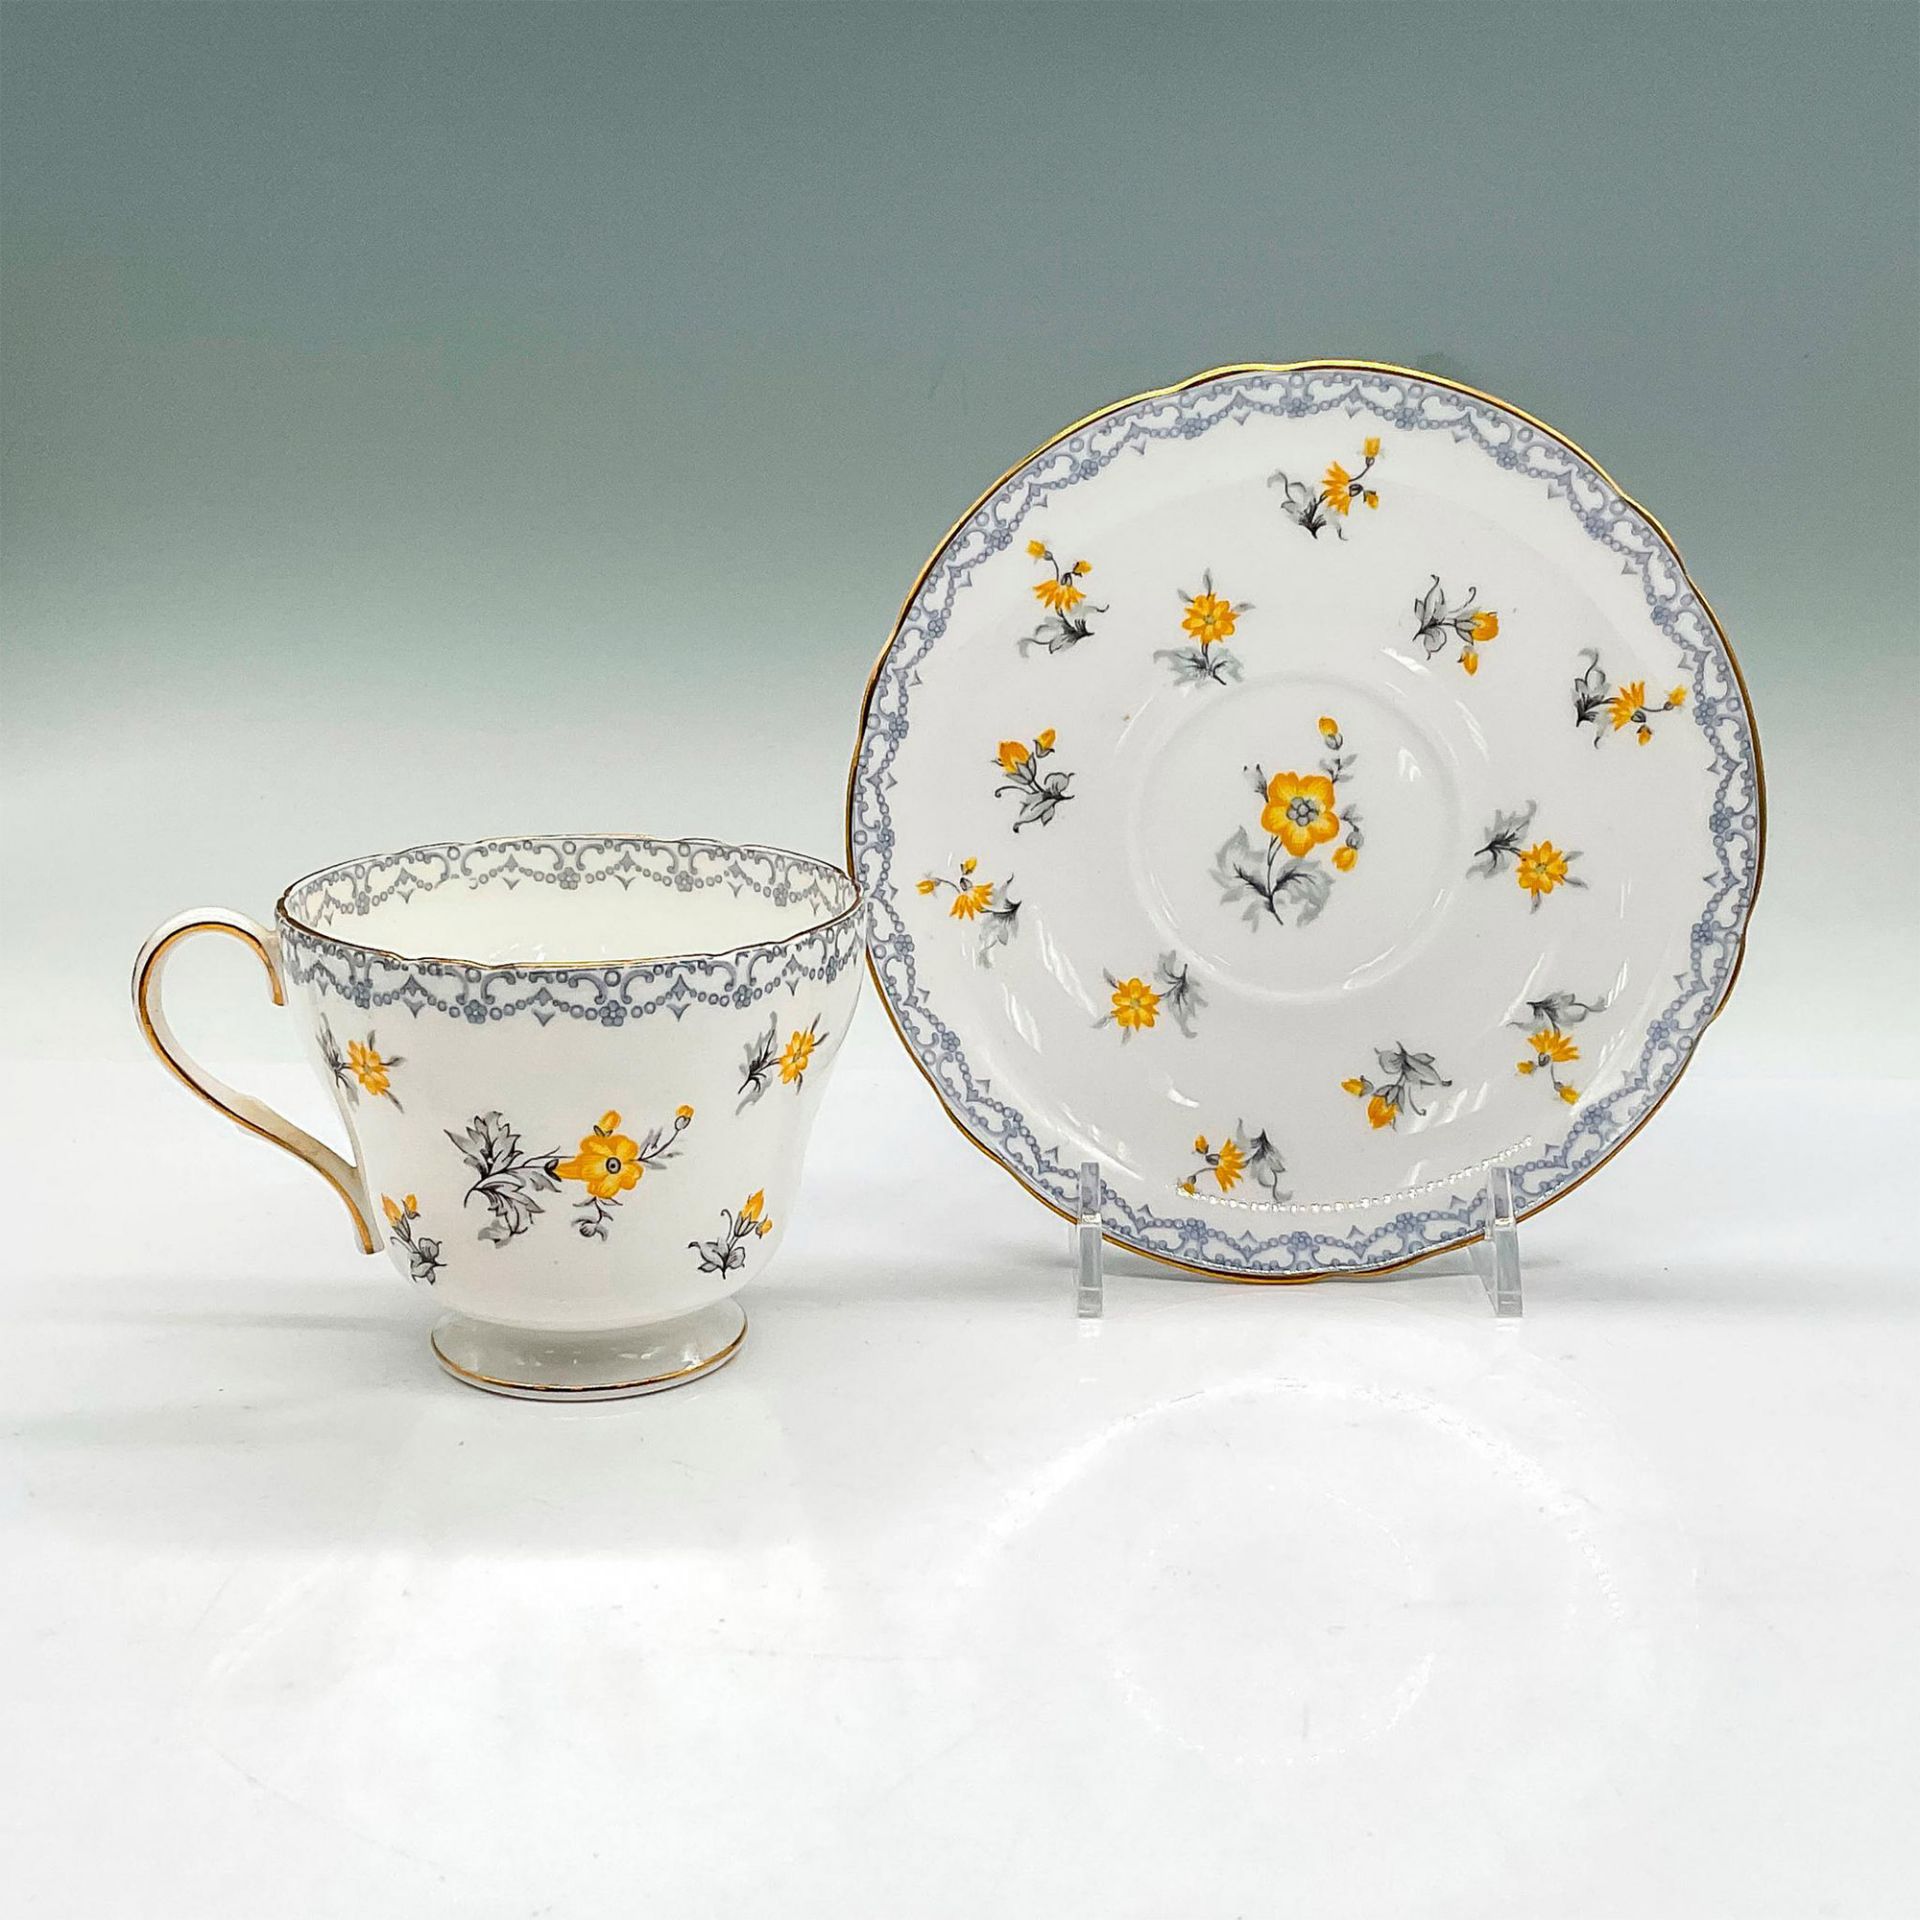 2pc Shelley China Teacup and Saucer, Charm - Image 2 of 3